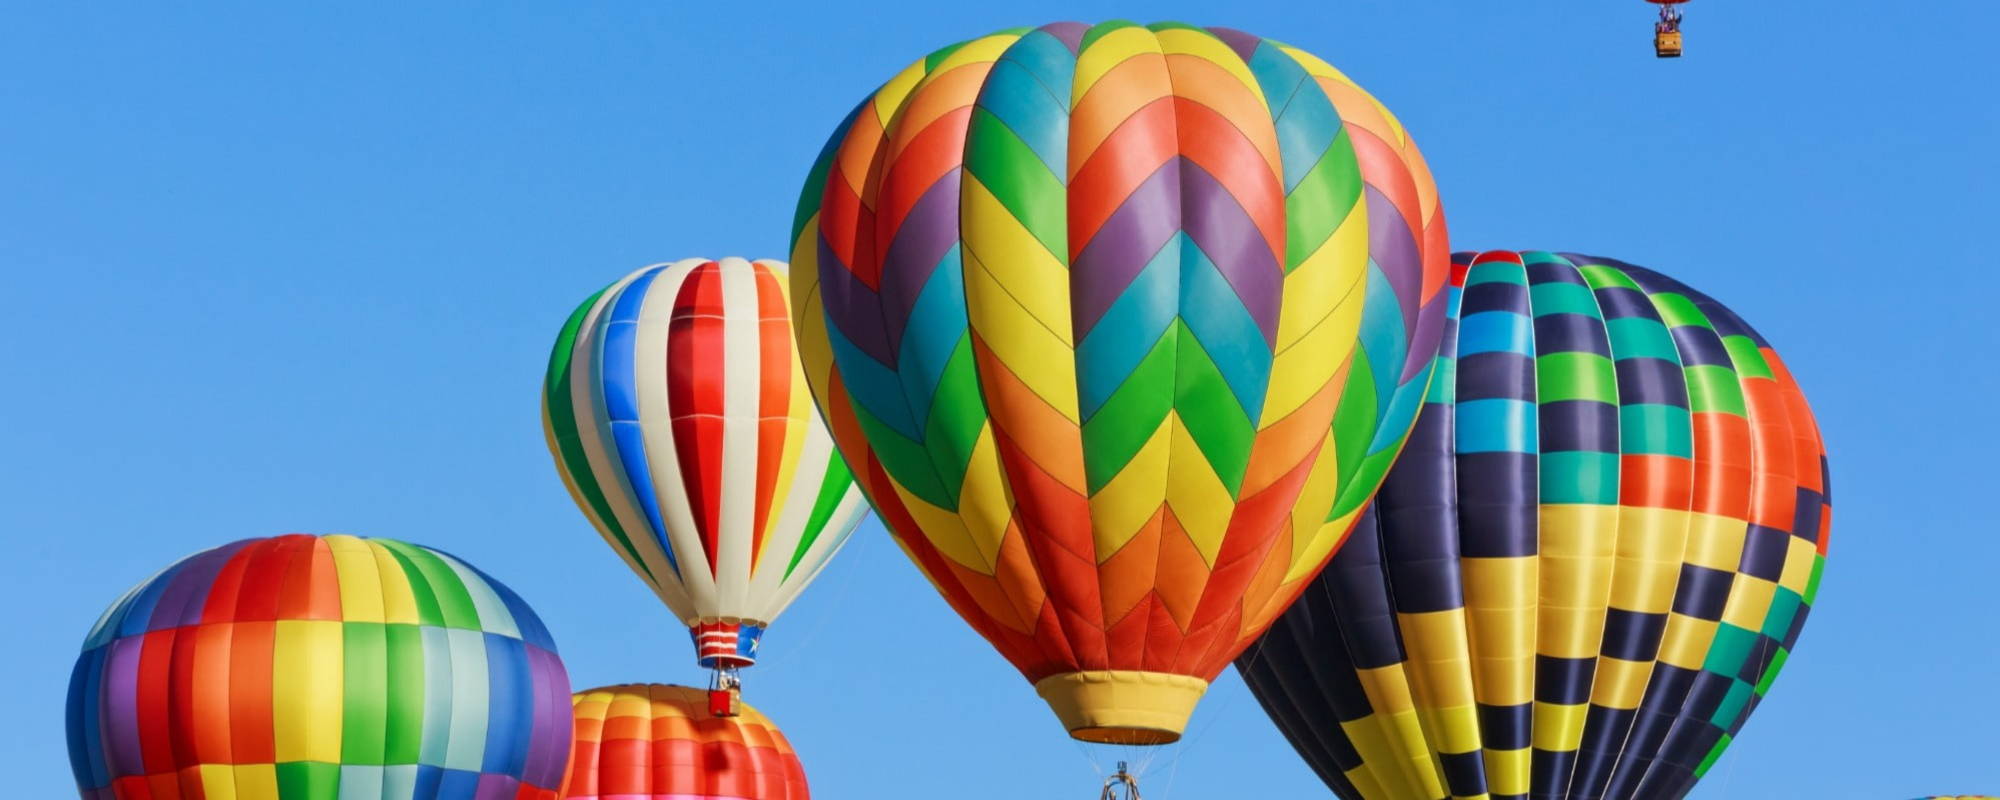 hot air balloons in multiple bright colours 